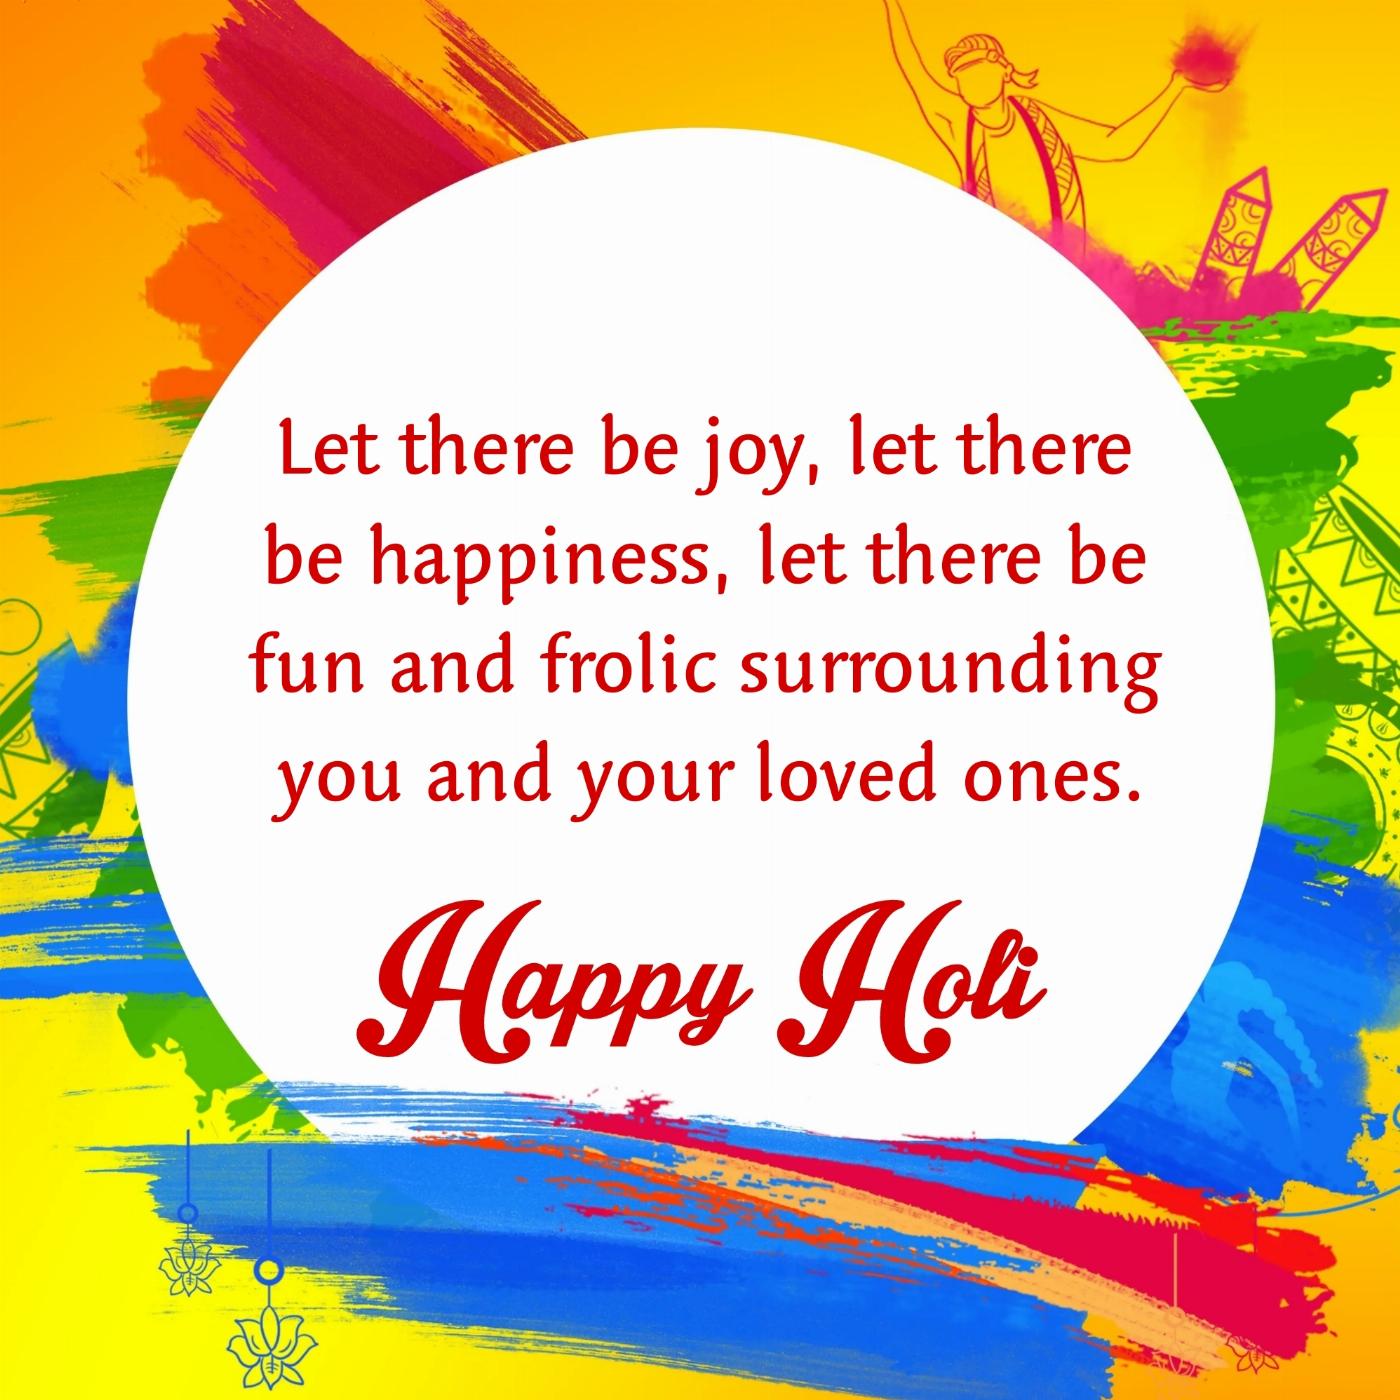 Happy Holi Wishes Images in English